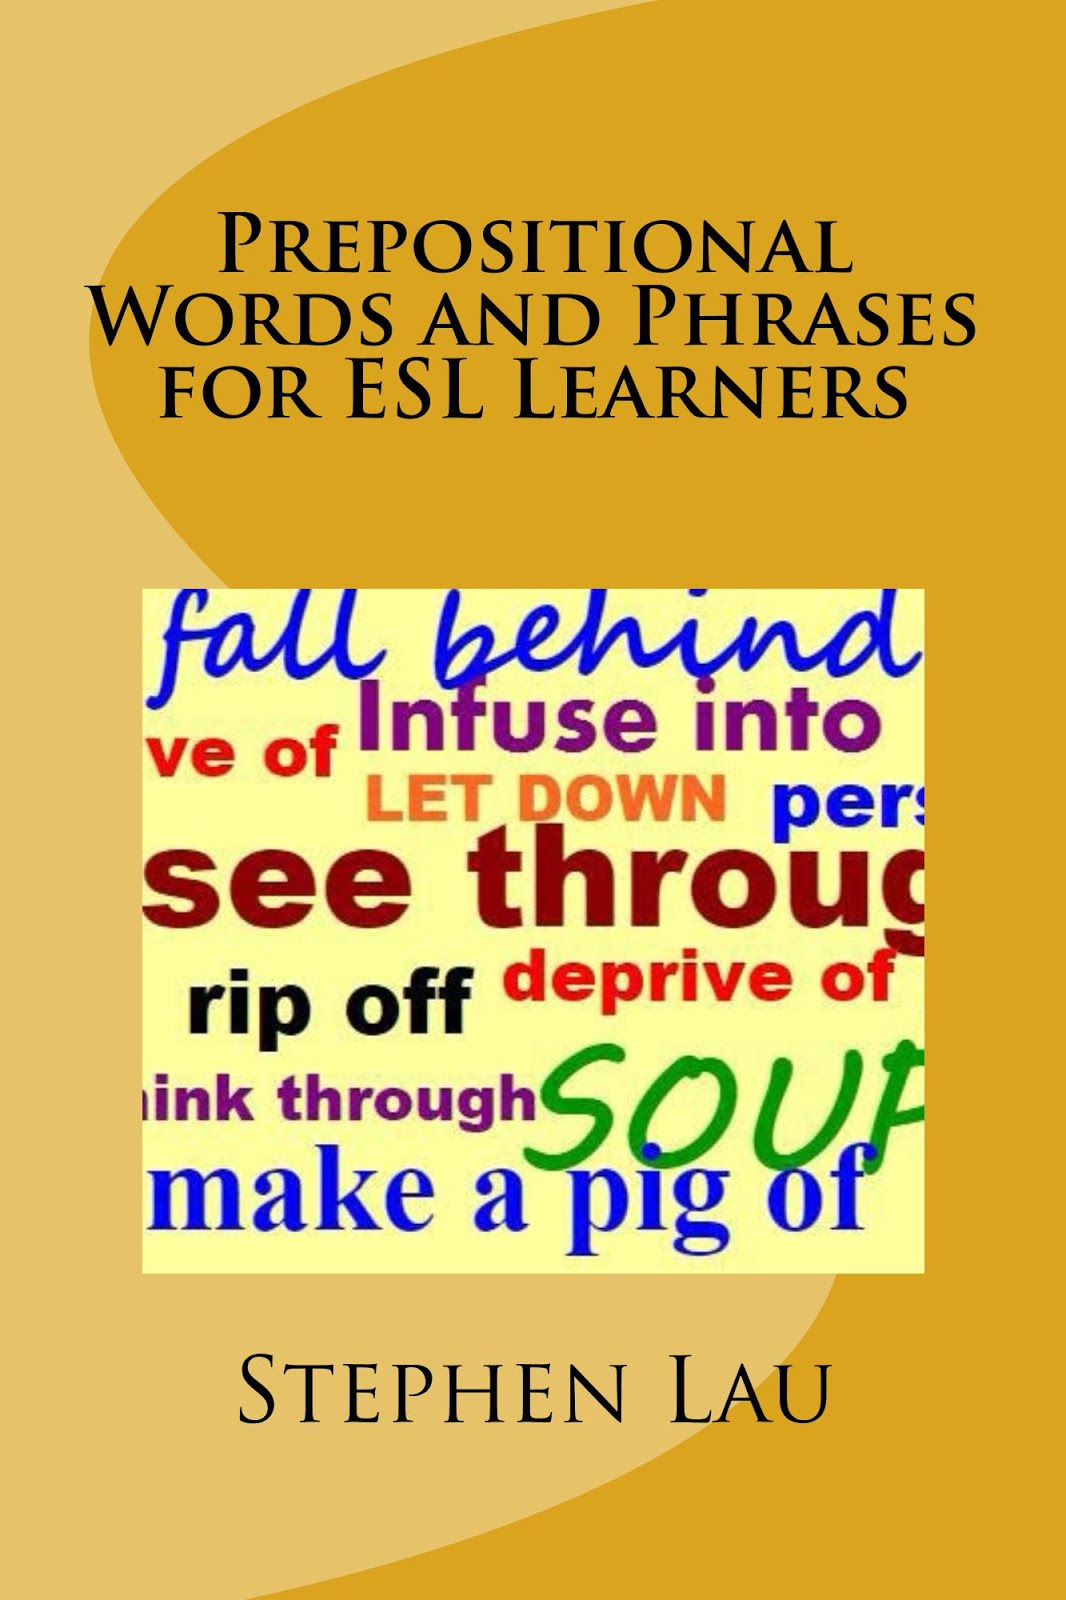 <b>Prepositional Words and Phrases</b>